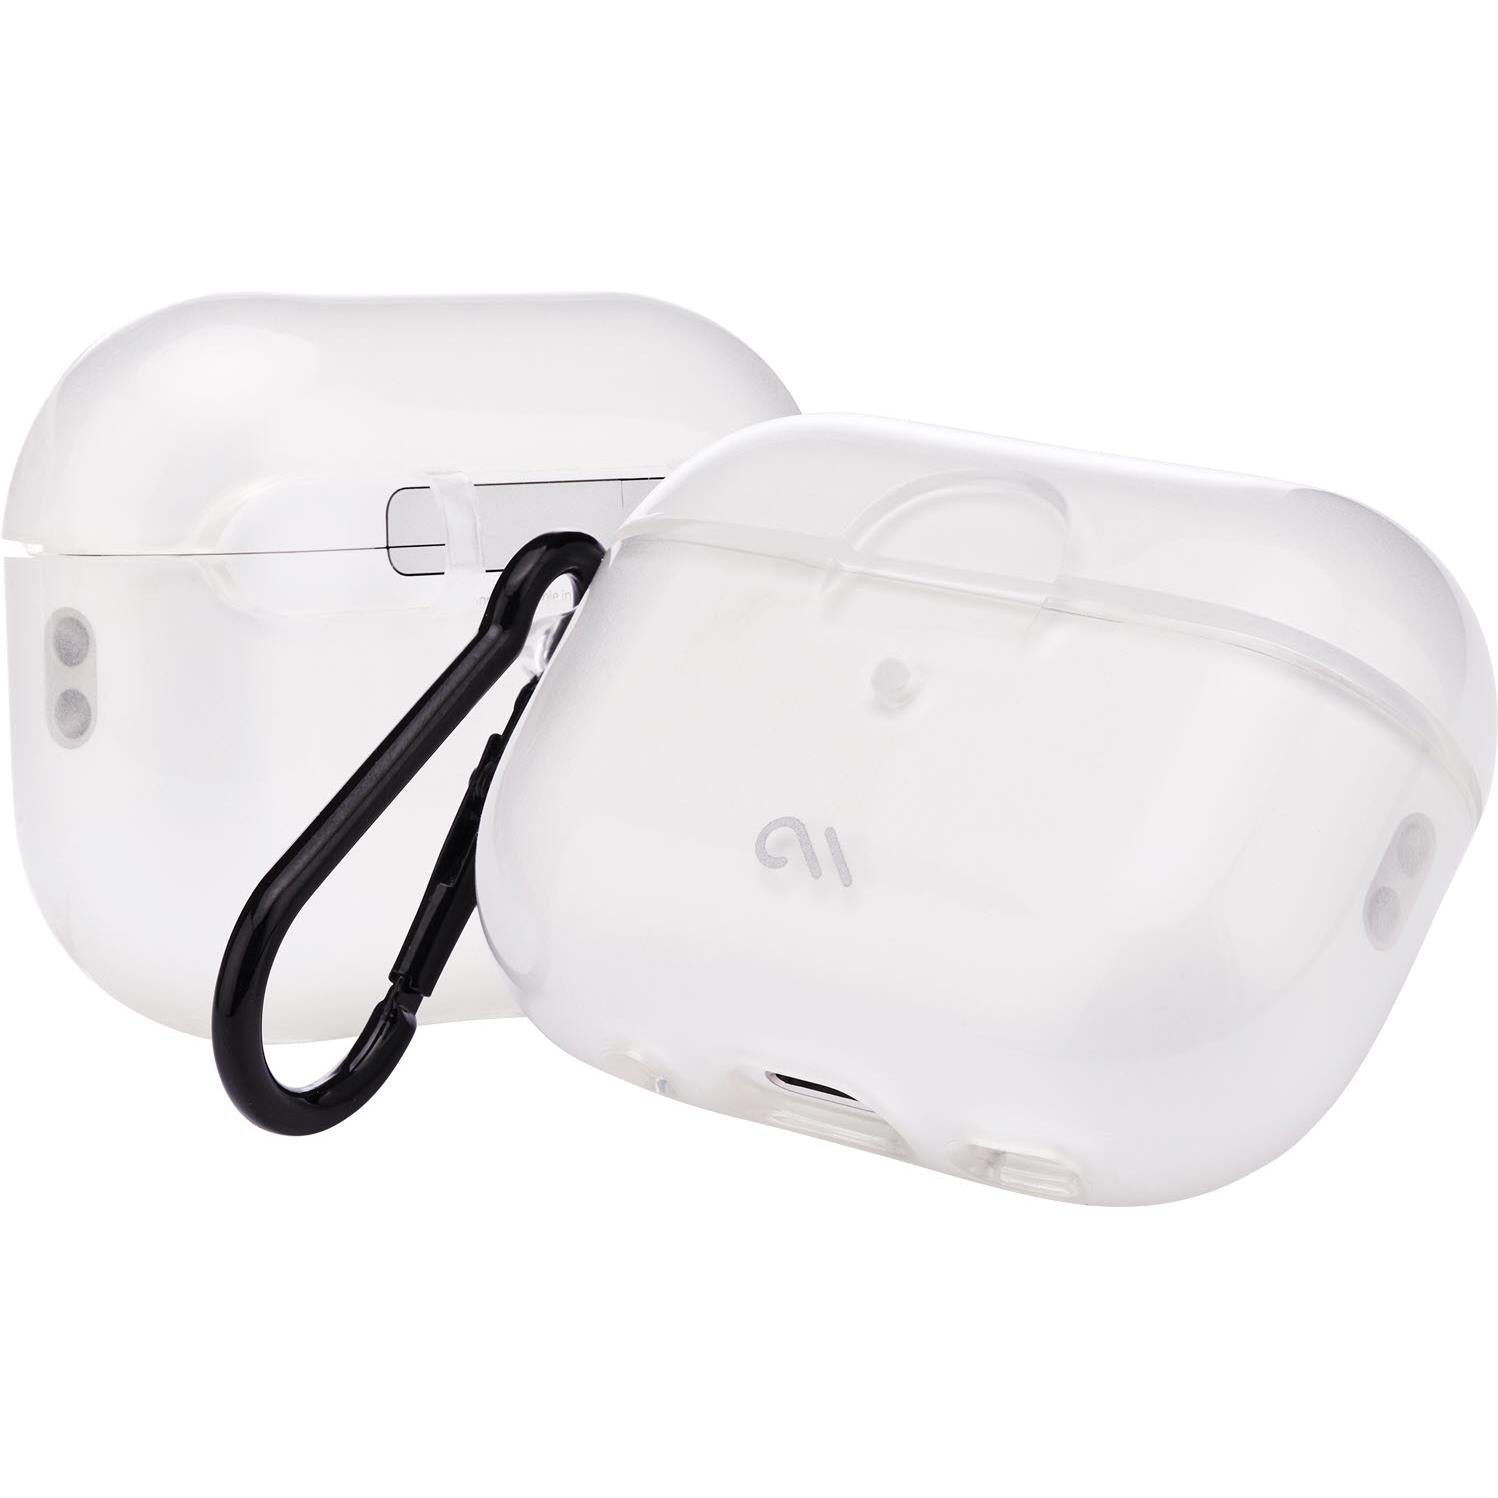 case-mate tough case with carabiner clip for airpods pro 1st/2nd gen (clear)